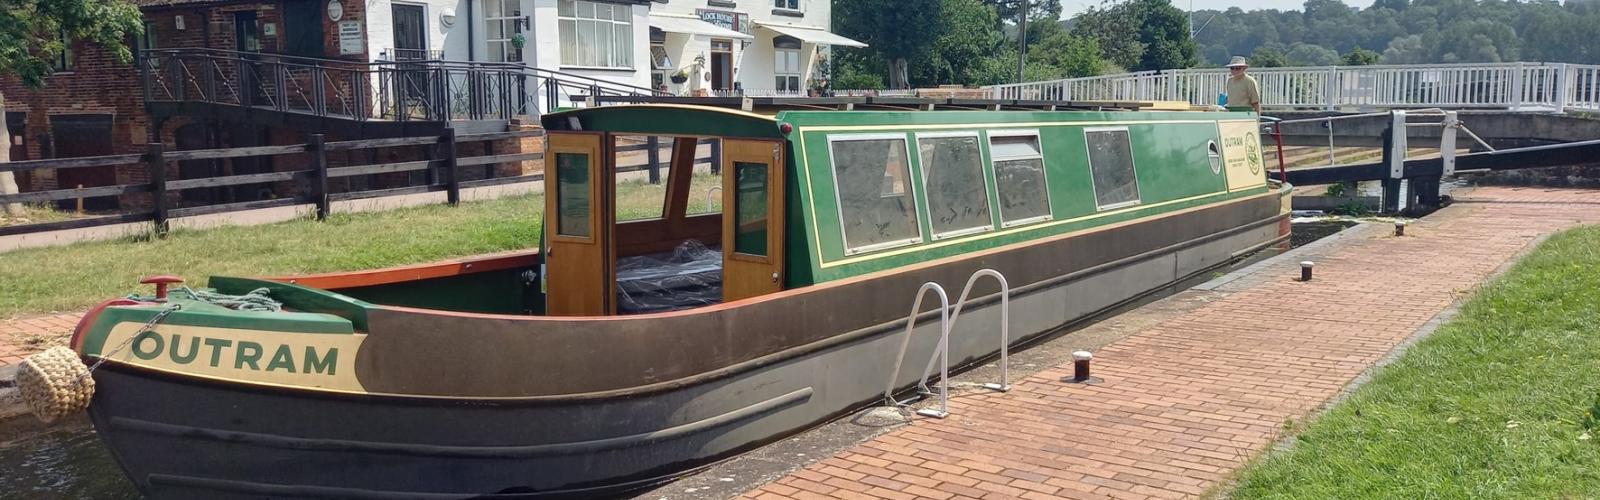 Outram Narrowboat